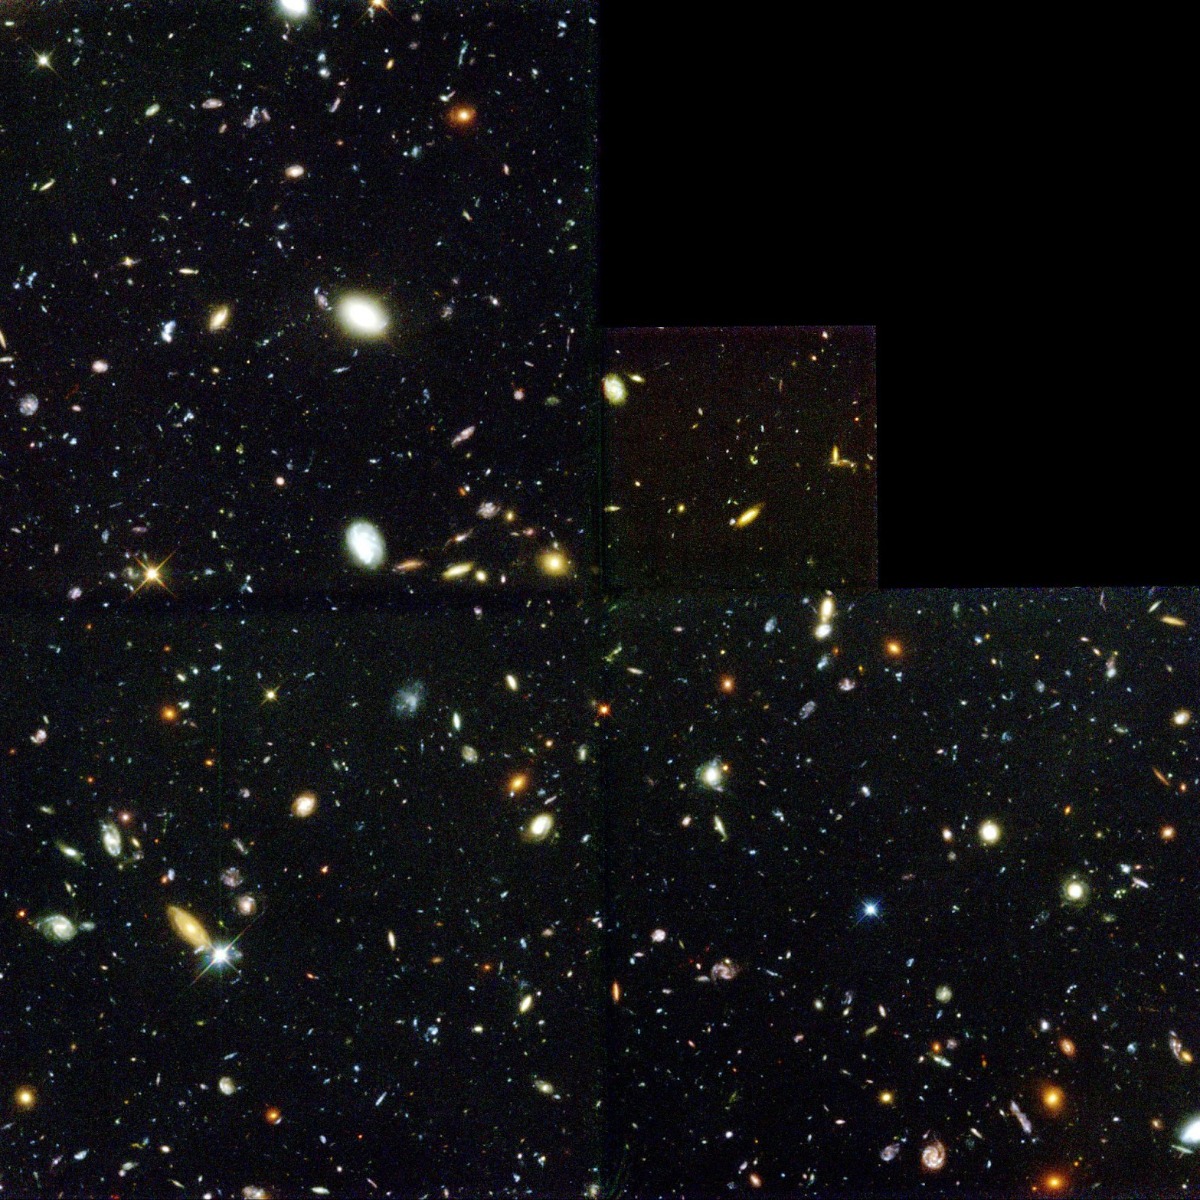 Image of the Hubble Deep Field